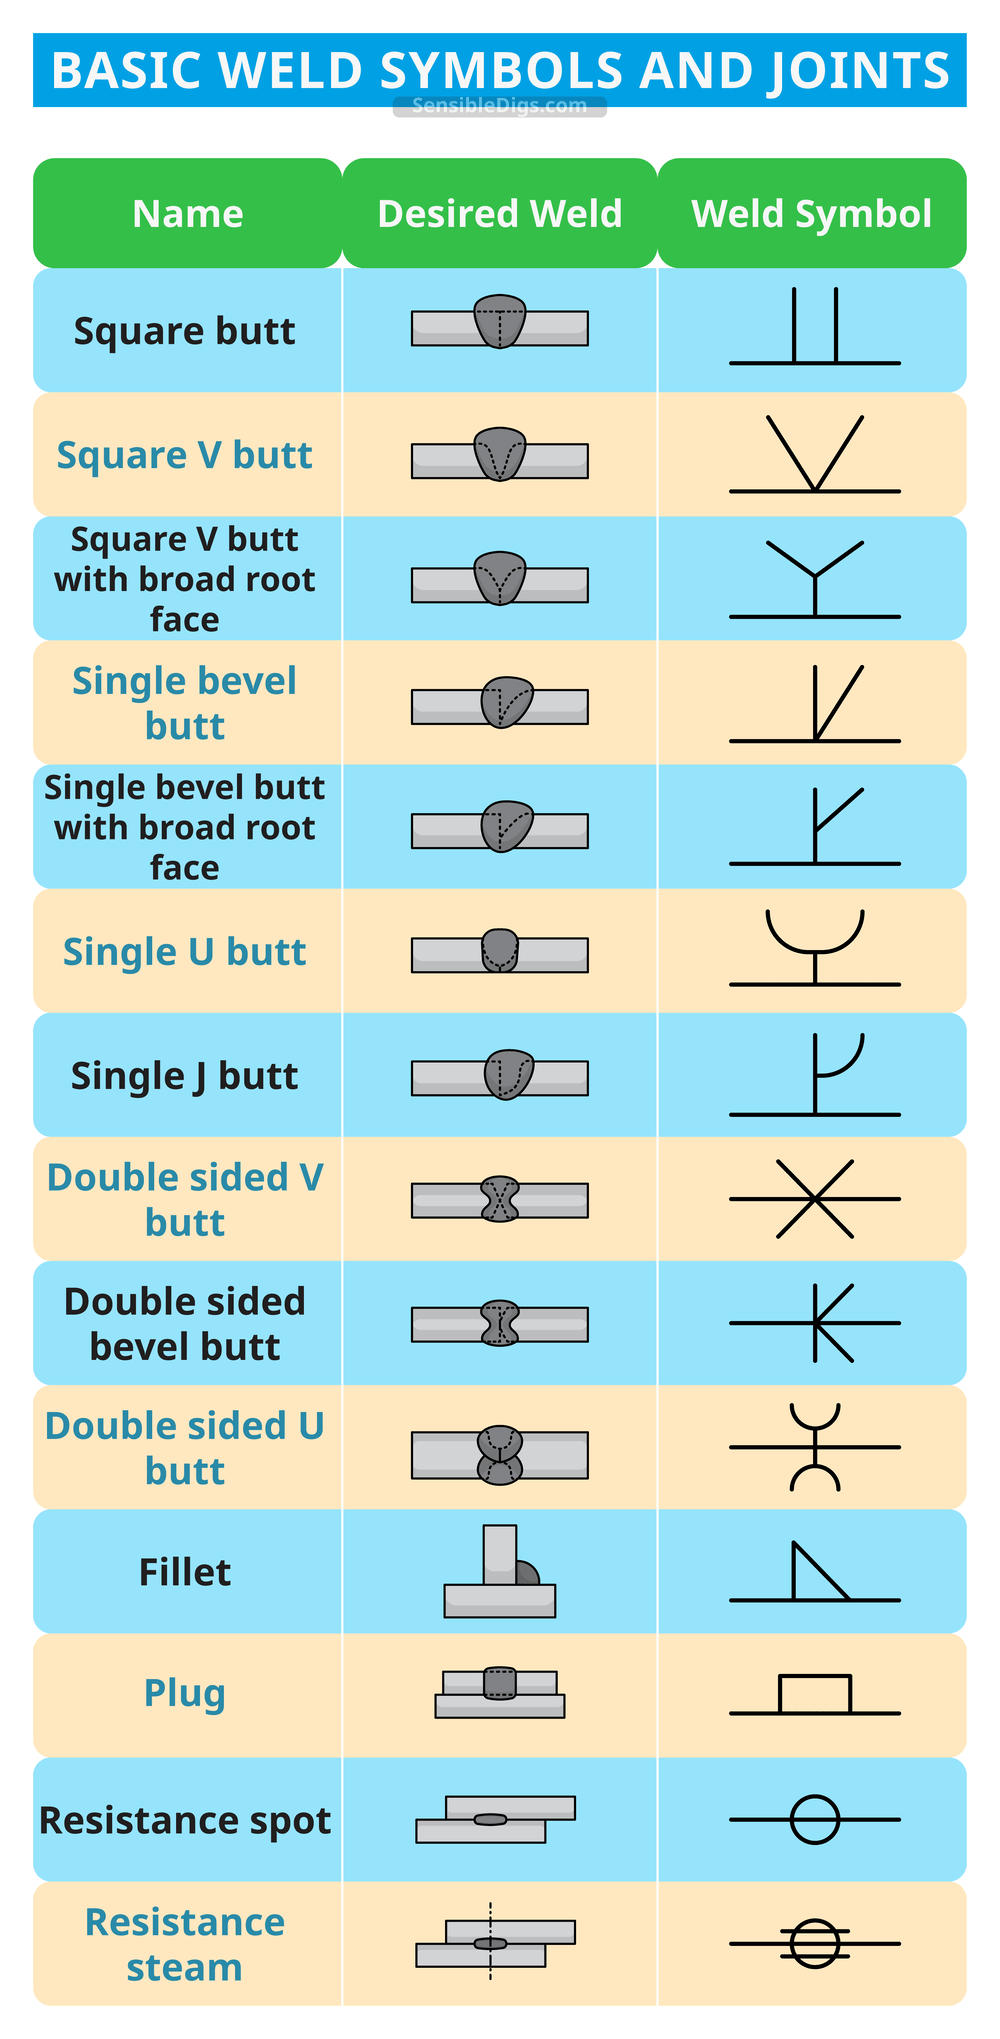 Basic Weld Symbols and Joints